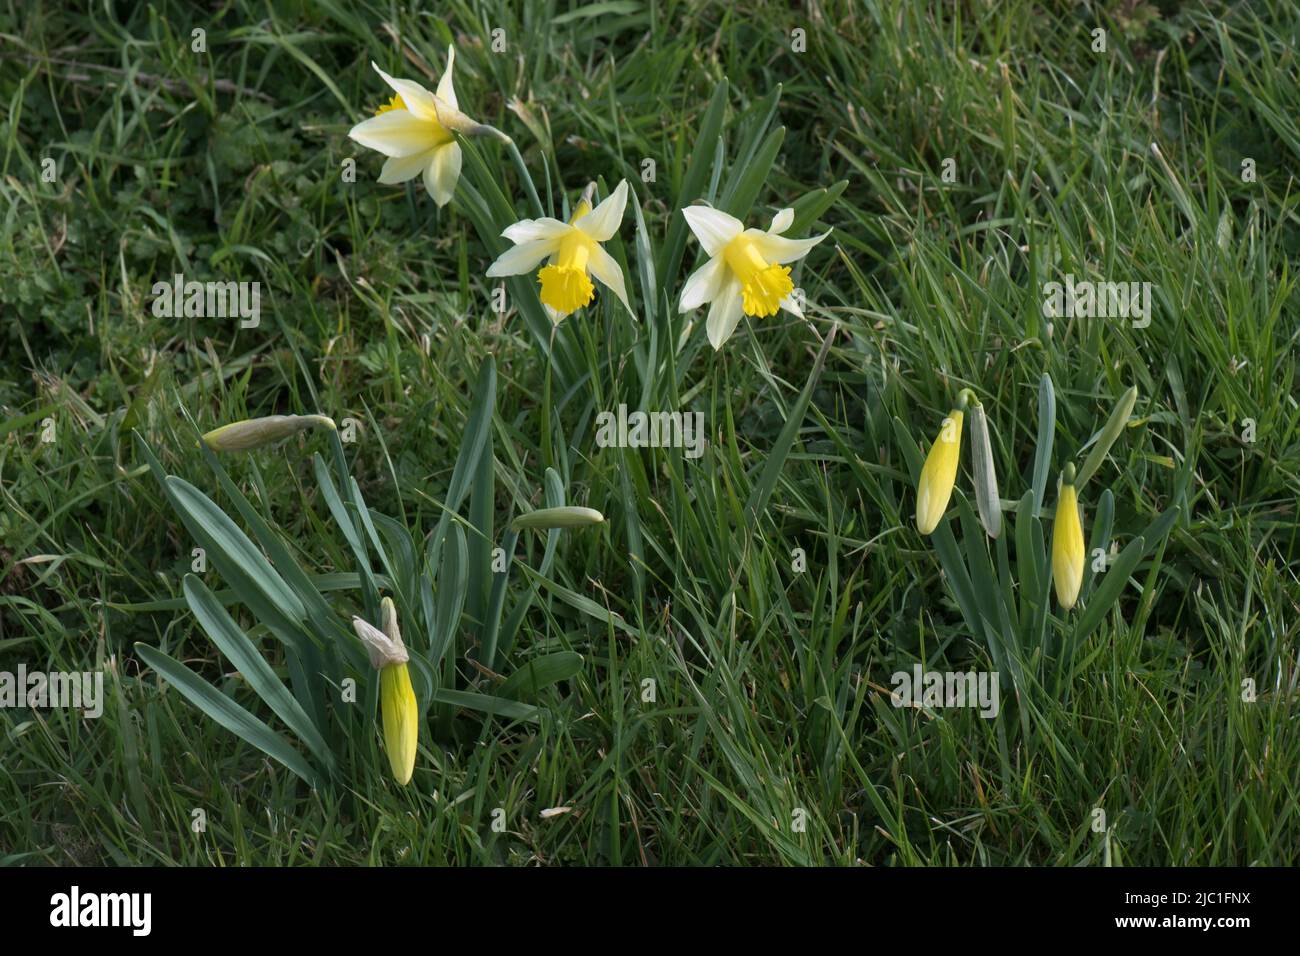 Wild daffodil or Lent lily (Narcissus pseudonarcissus) with pale yellow tepals and darker trumpet flowering in rough grassland in spring, Berkshire, A Stock Photo